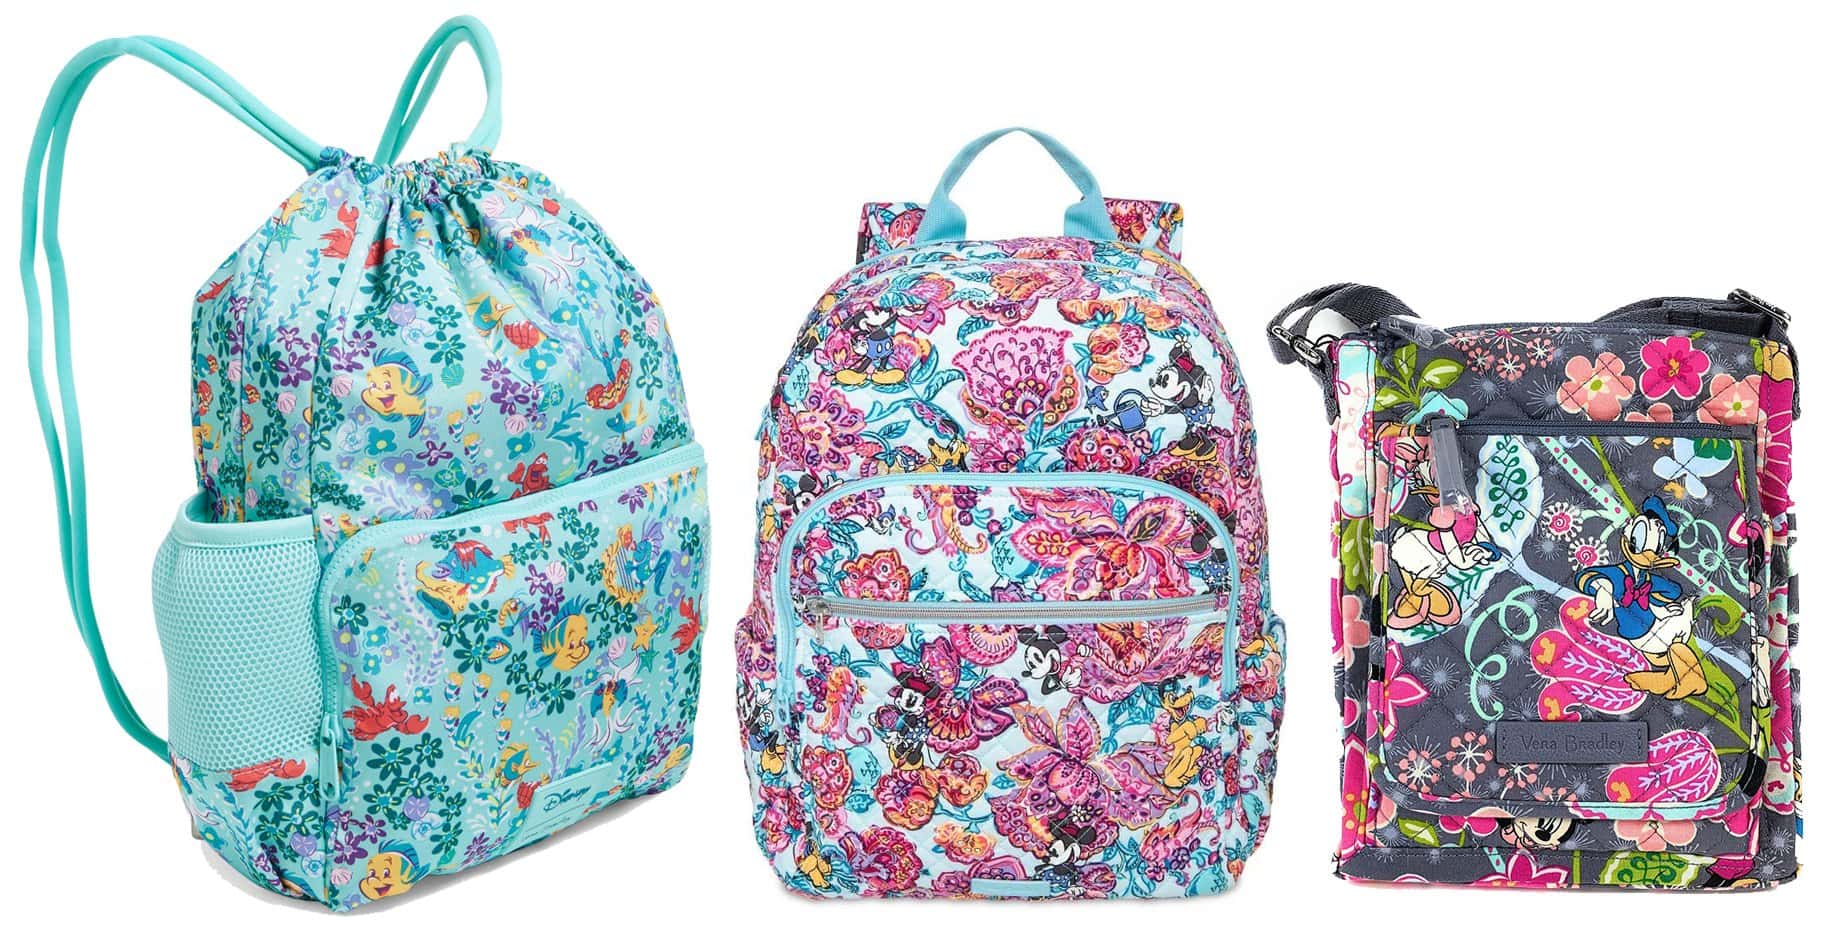 The Vera Bradley x Disney collaboration features everyone's most-loved Disney characters on Vera Bradley's signature styles